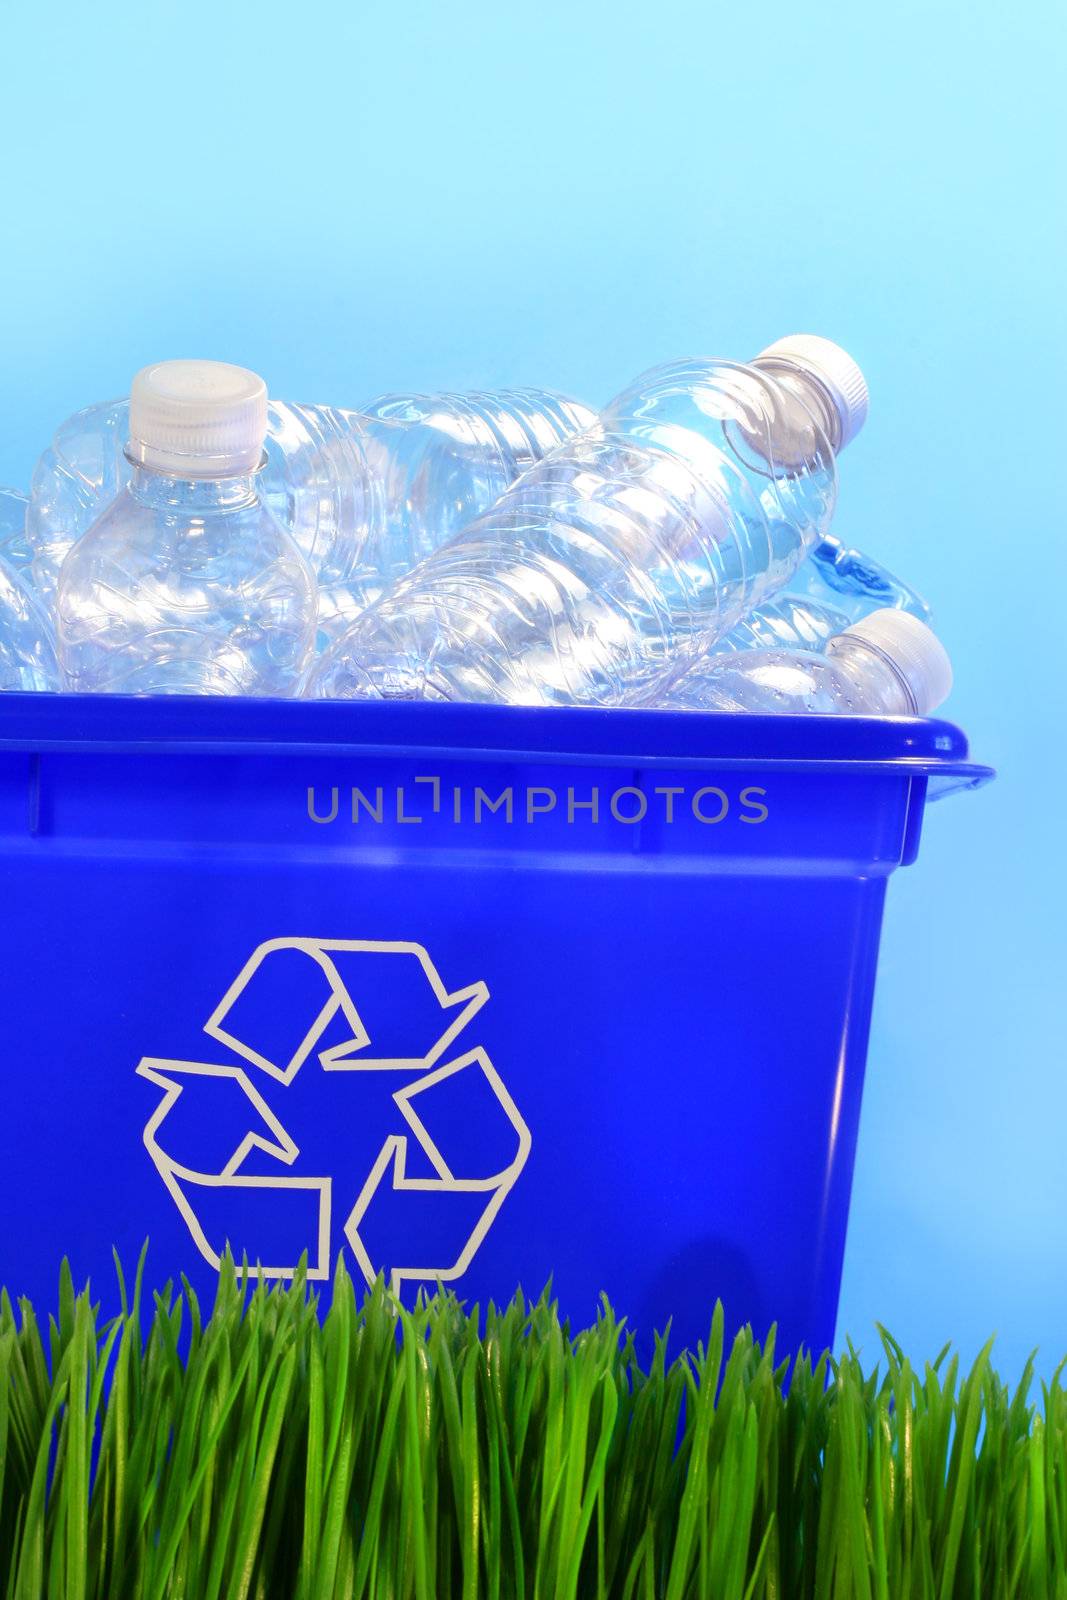 Bottles in recycling container bin by Sandralise